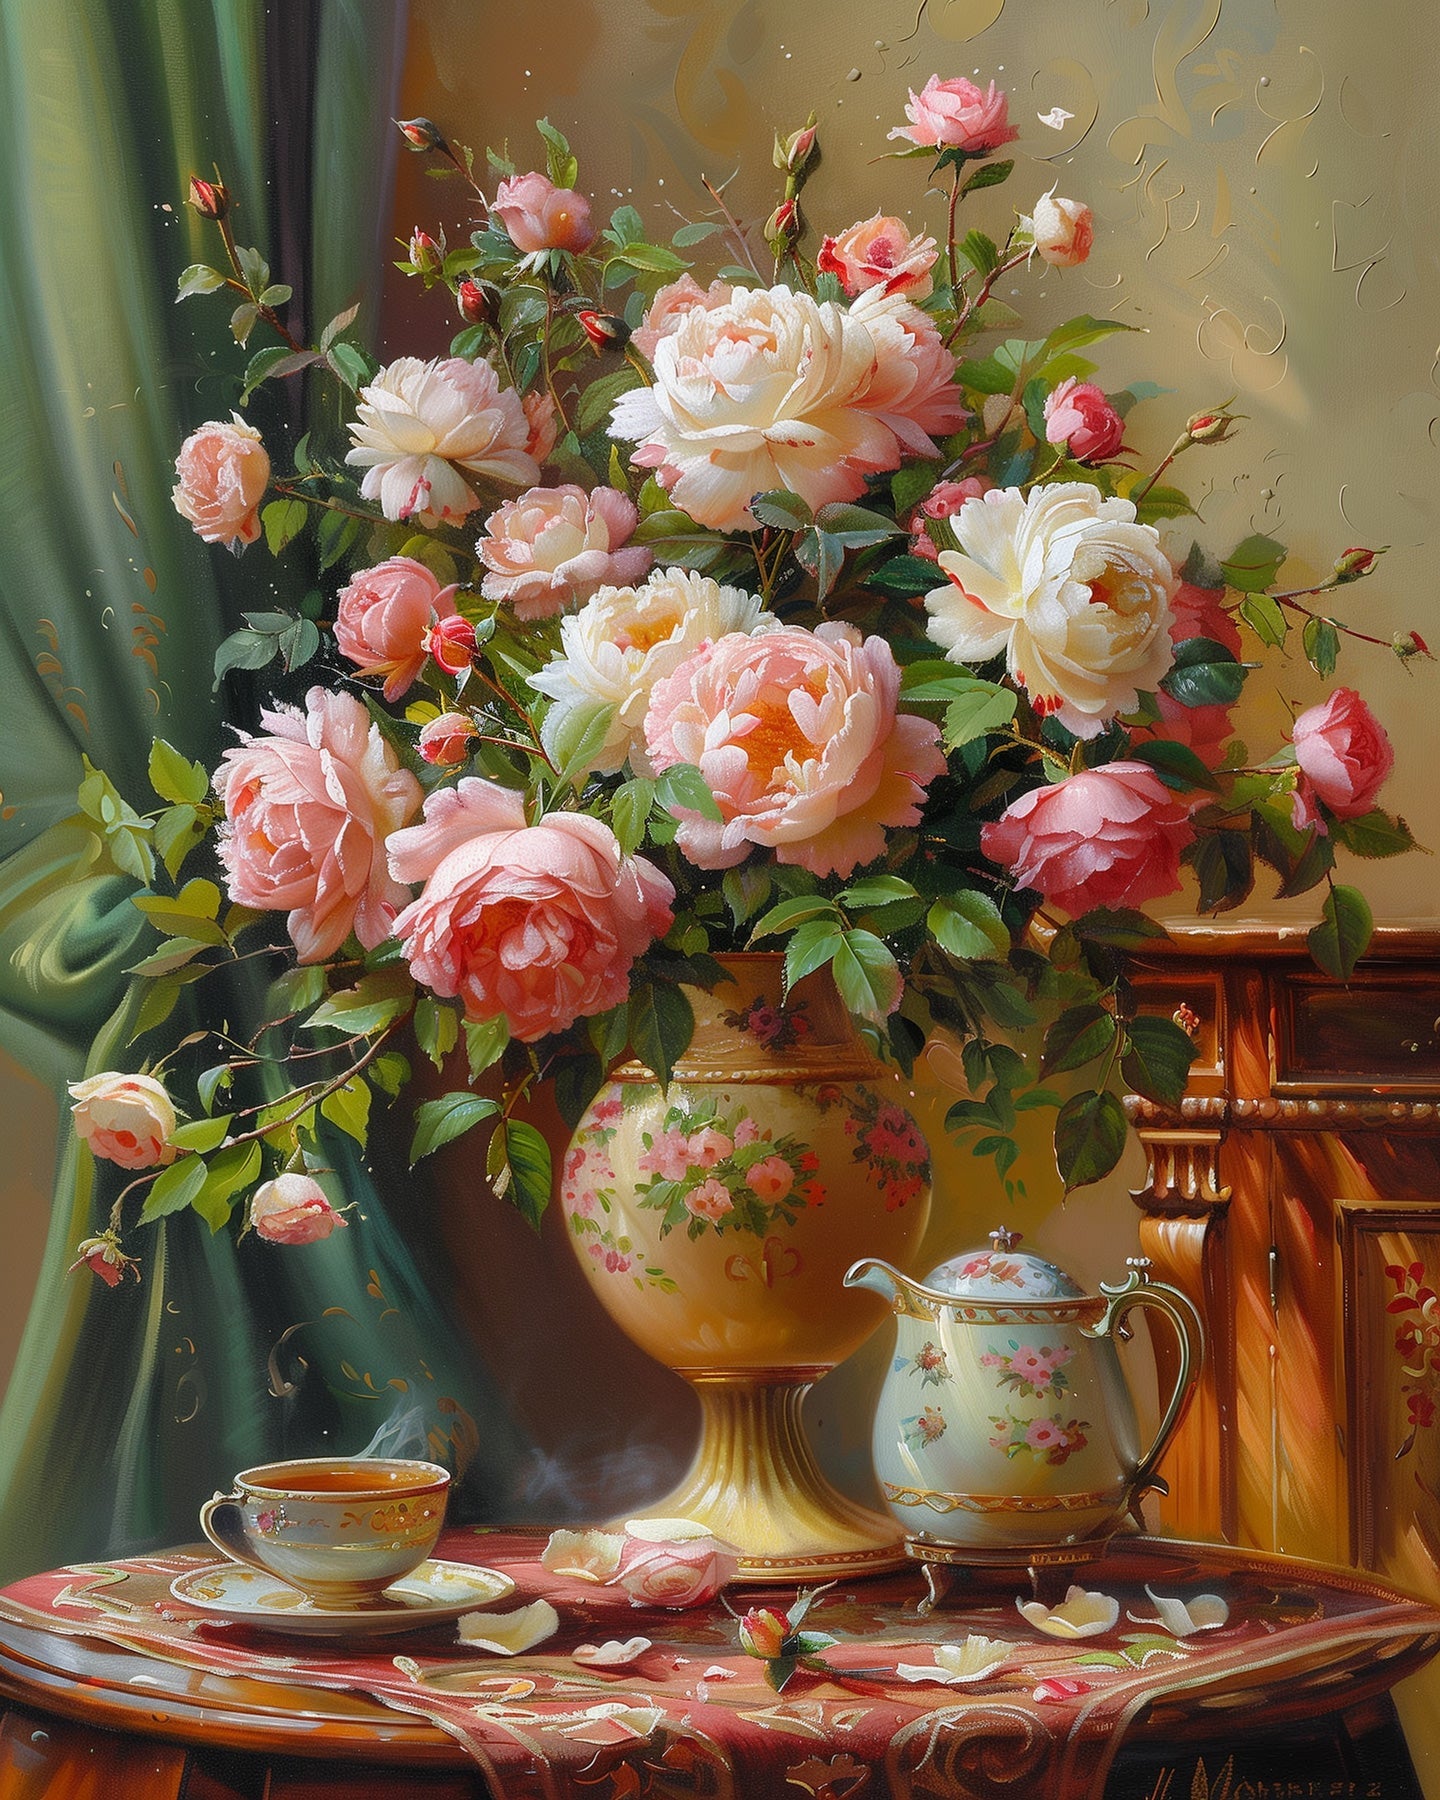 Tea Time with Flowers - BestPaintByNumbers - Paint by Numbers Fixed Kit